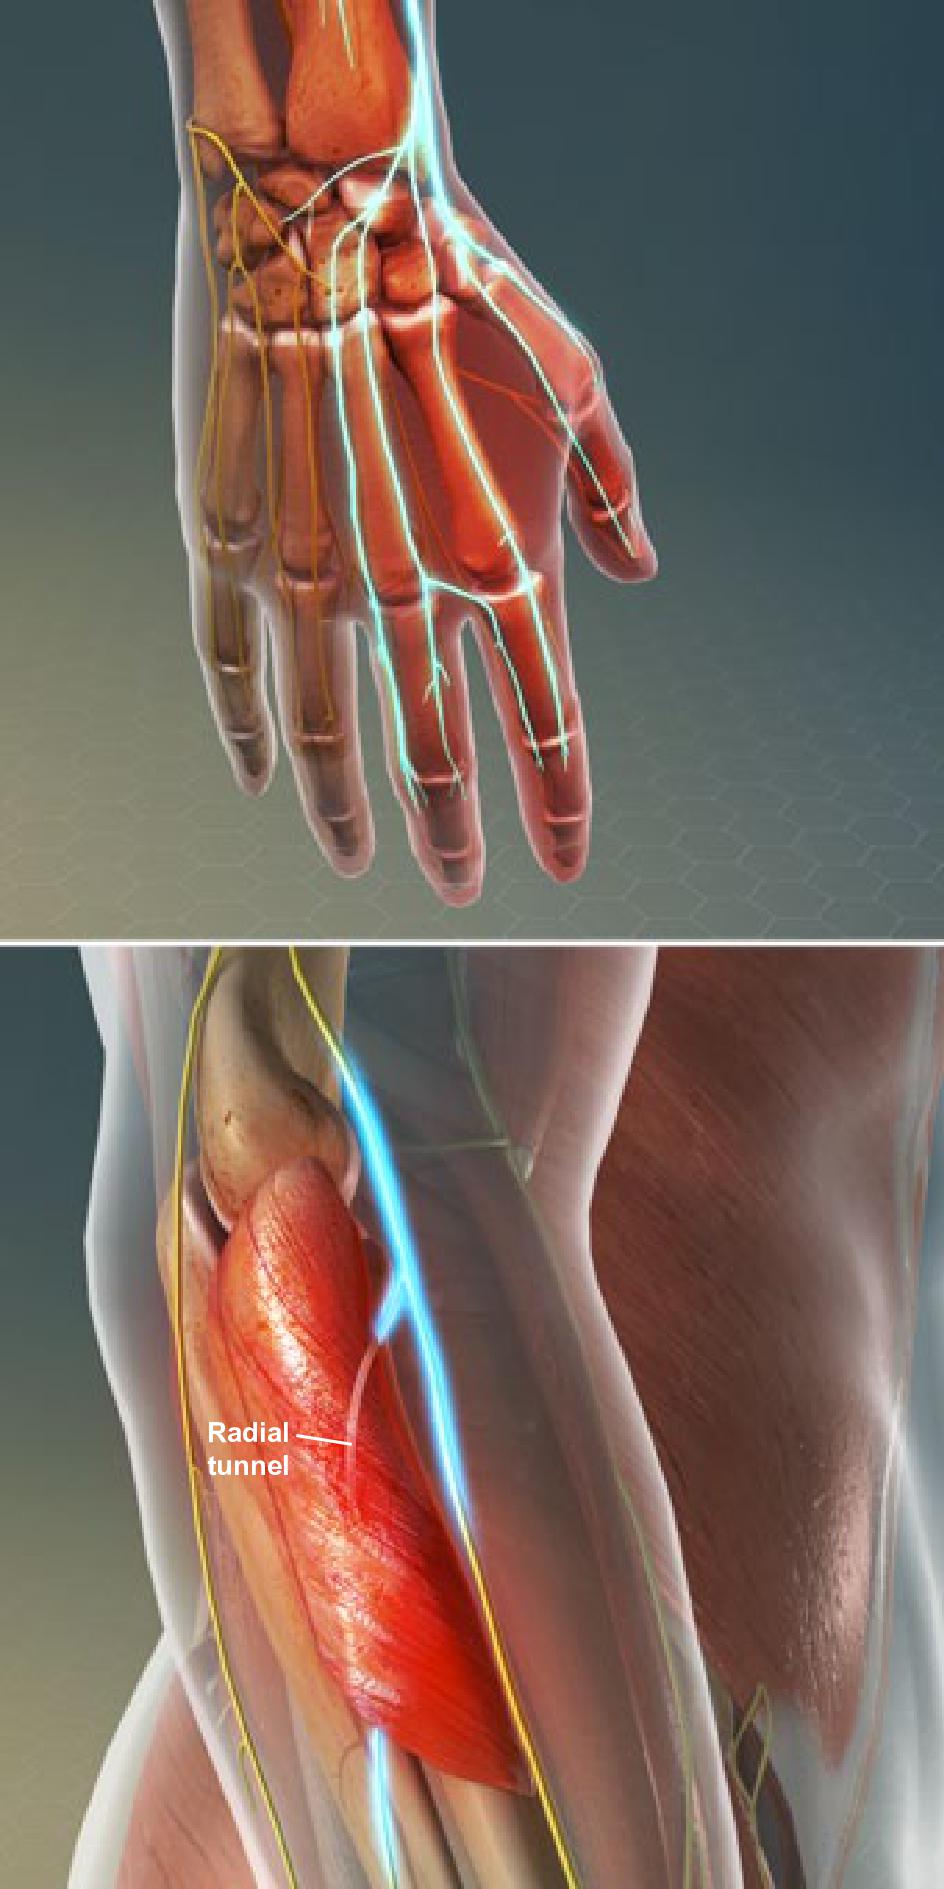 Radial Tunnel Syndrome Entrapment Of The Radial Nerve